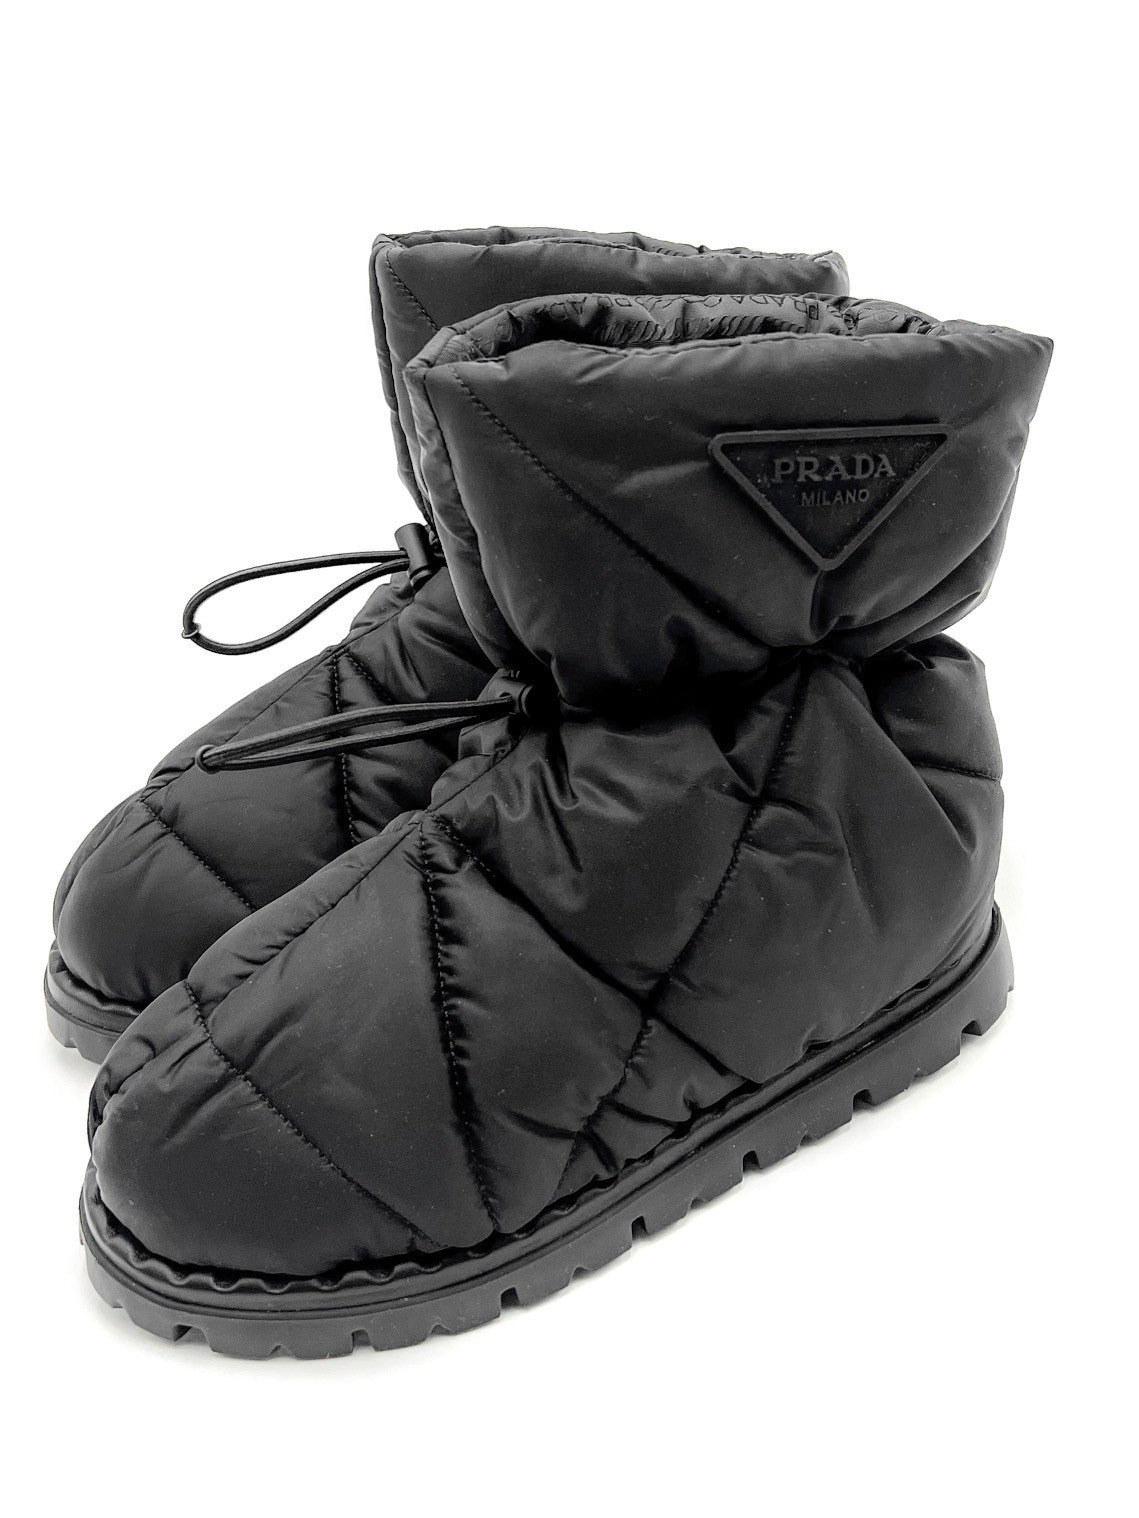 Prada Blow Padded Ankle Boots